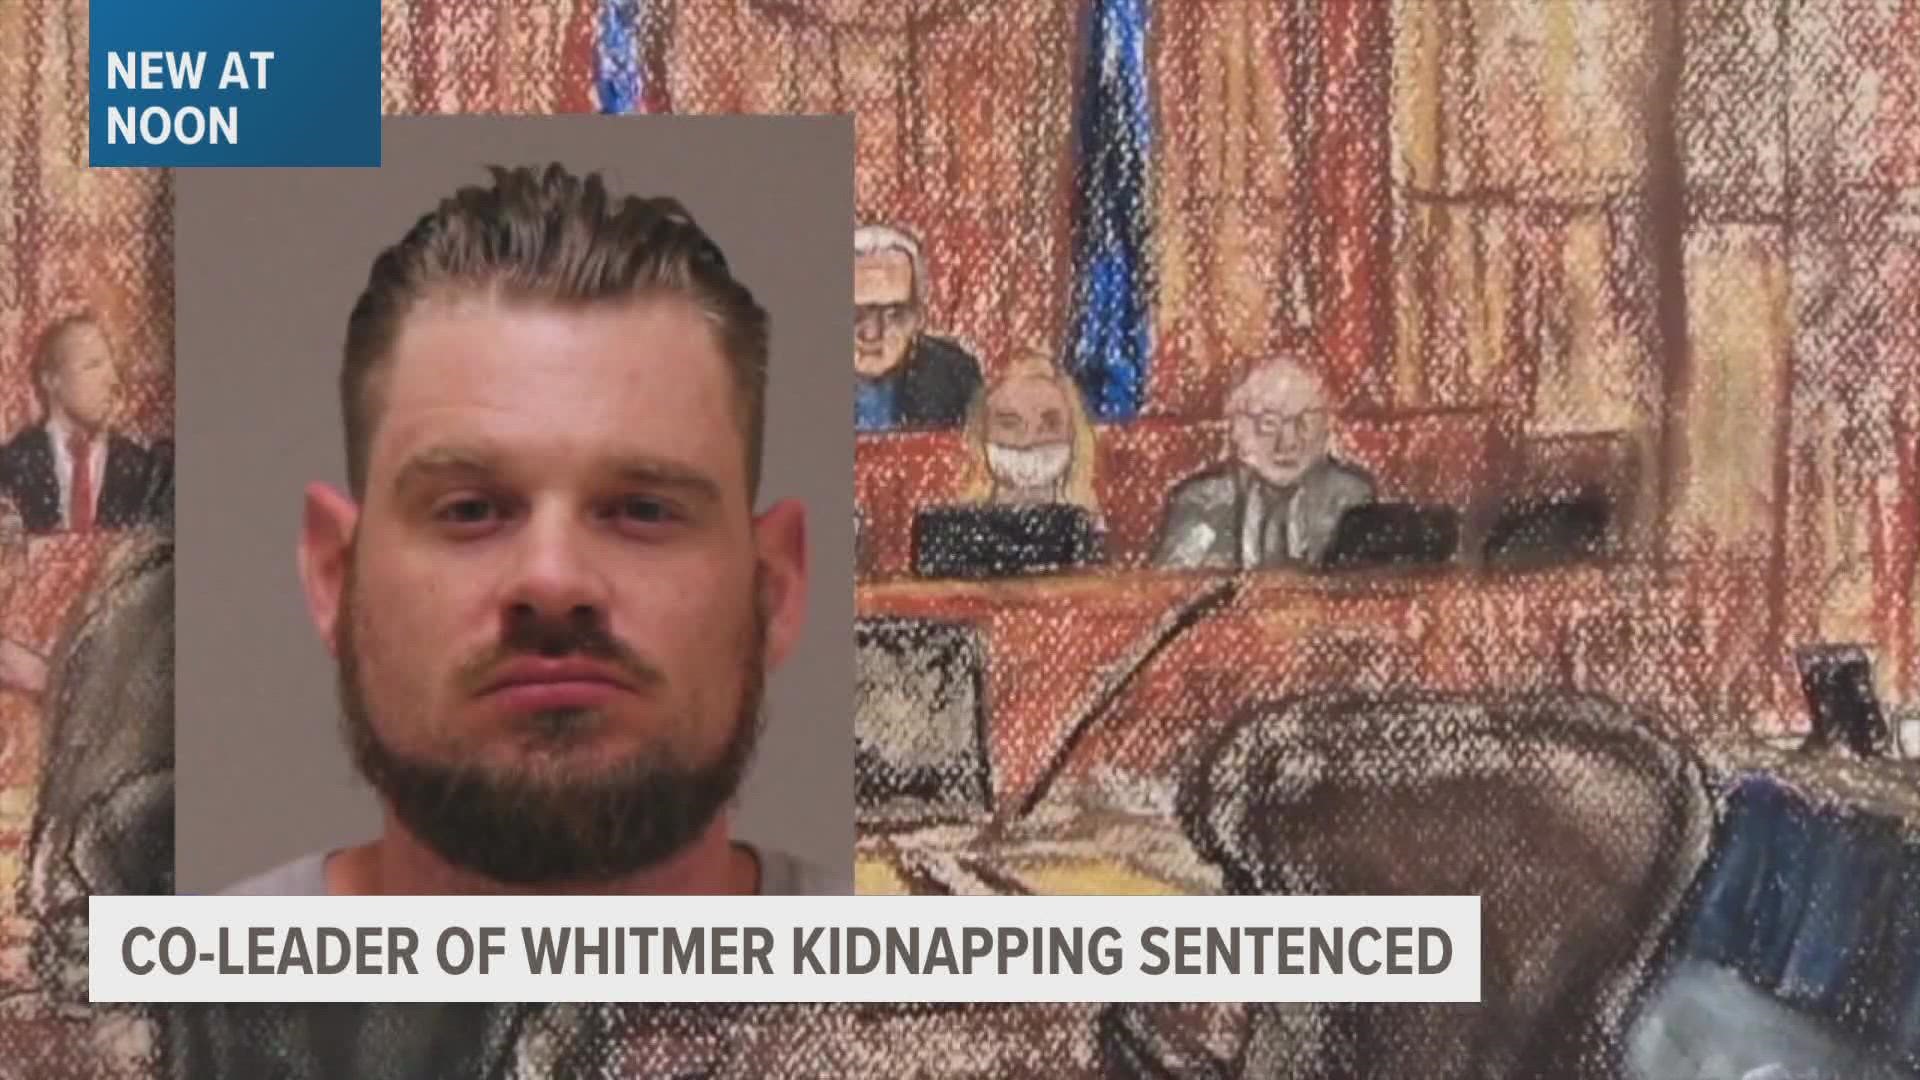 The co-leader of a plot to kidnap Michigan Gov. Gretchen Whitmer has been sentenced to 16 years in prison.